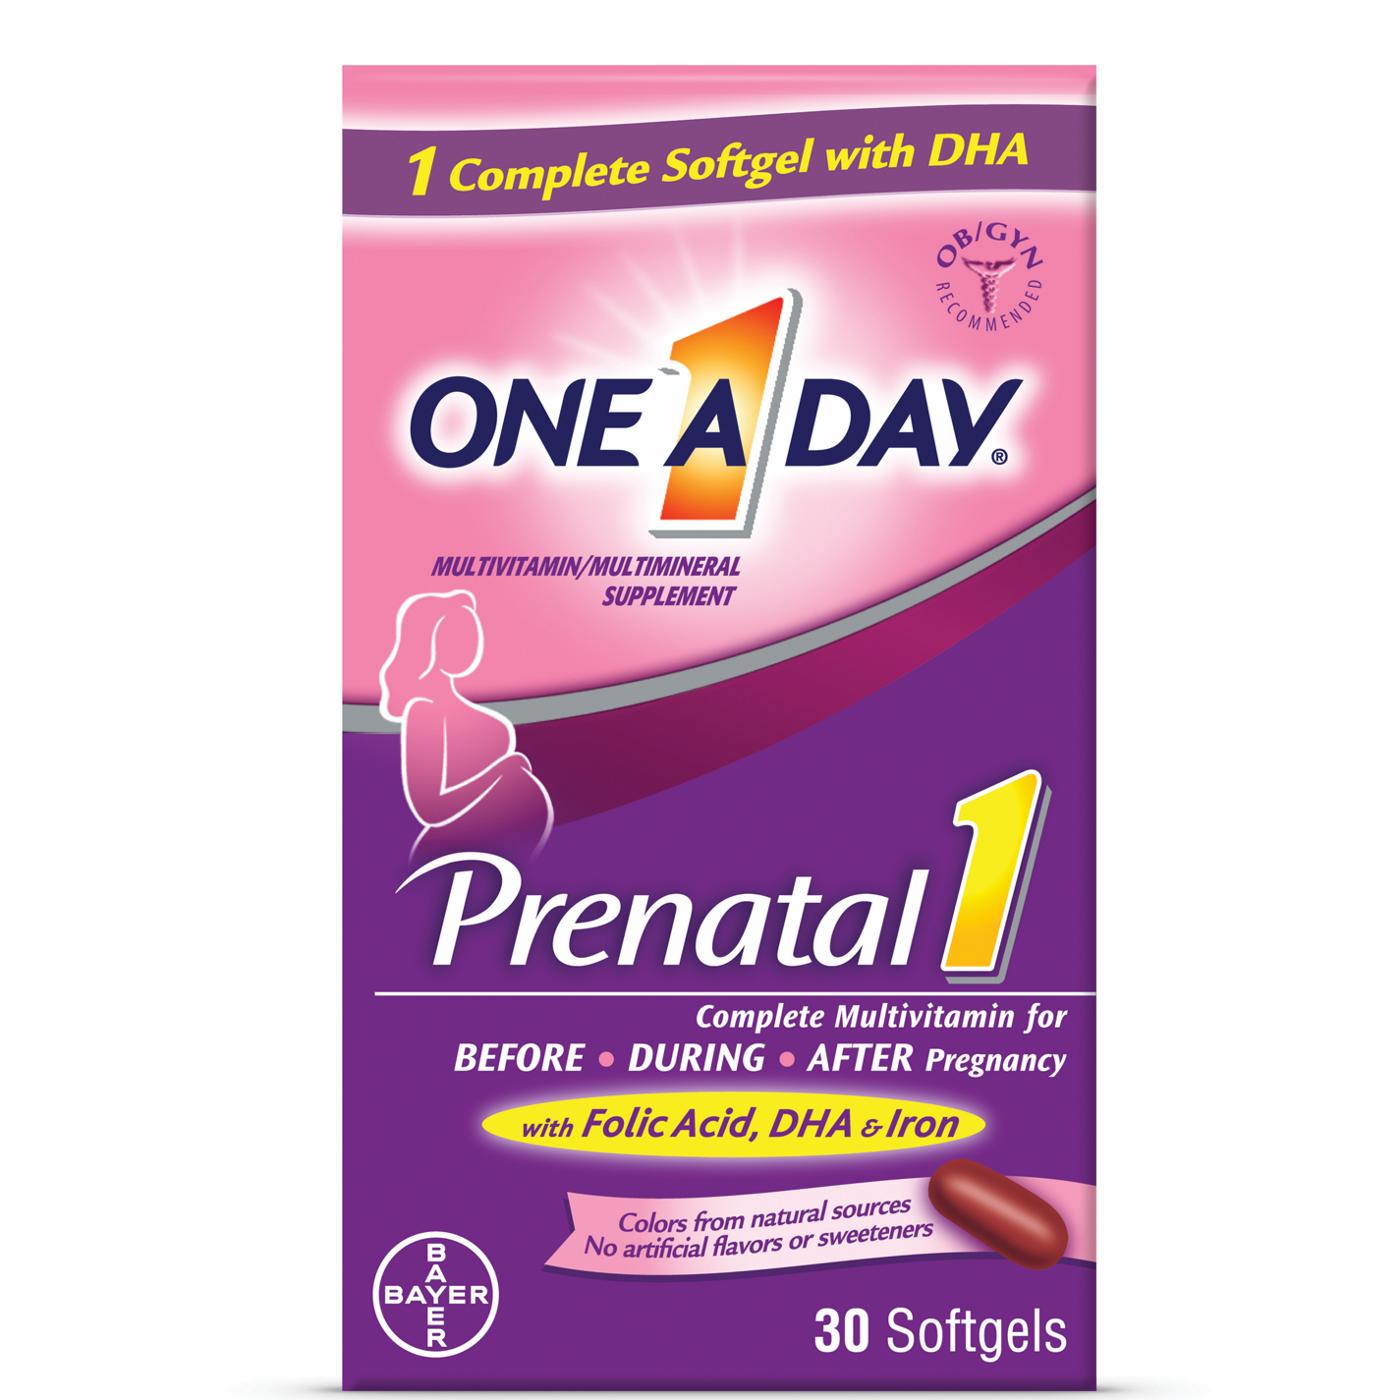 One A Day Prenatal 1 Complete Multivitamin Softgels; image 1 of 7